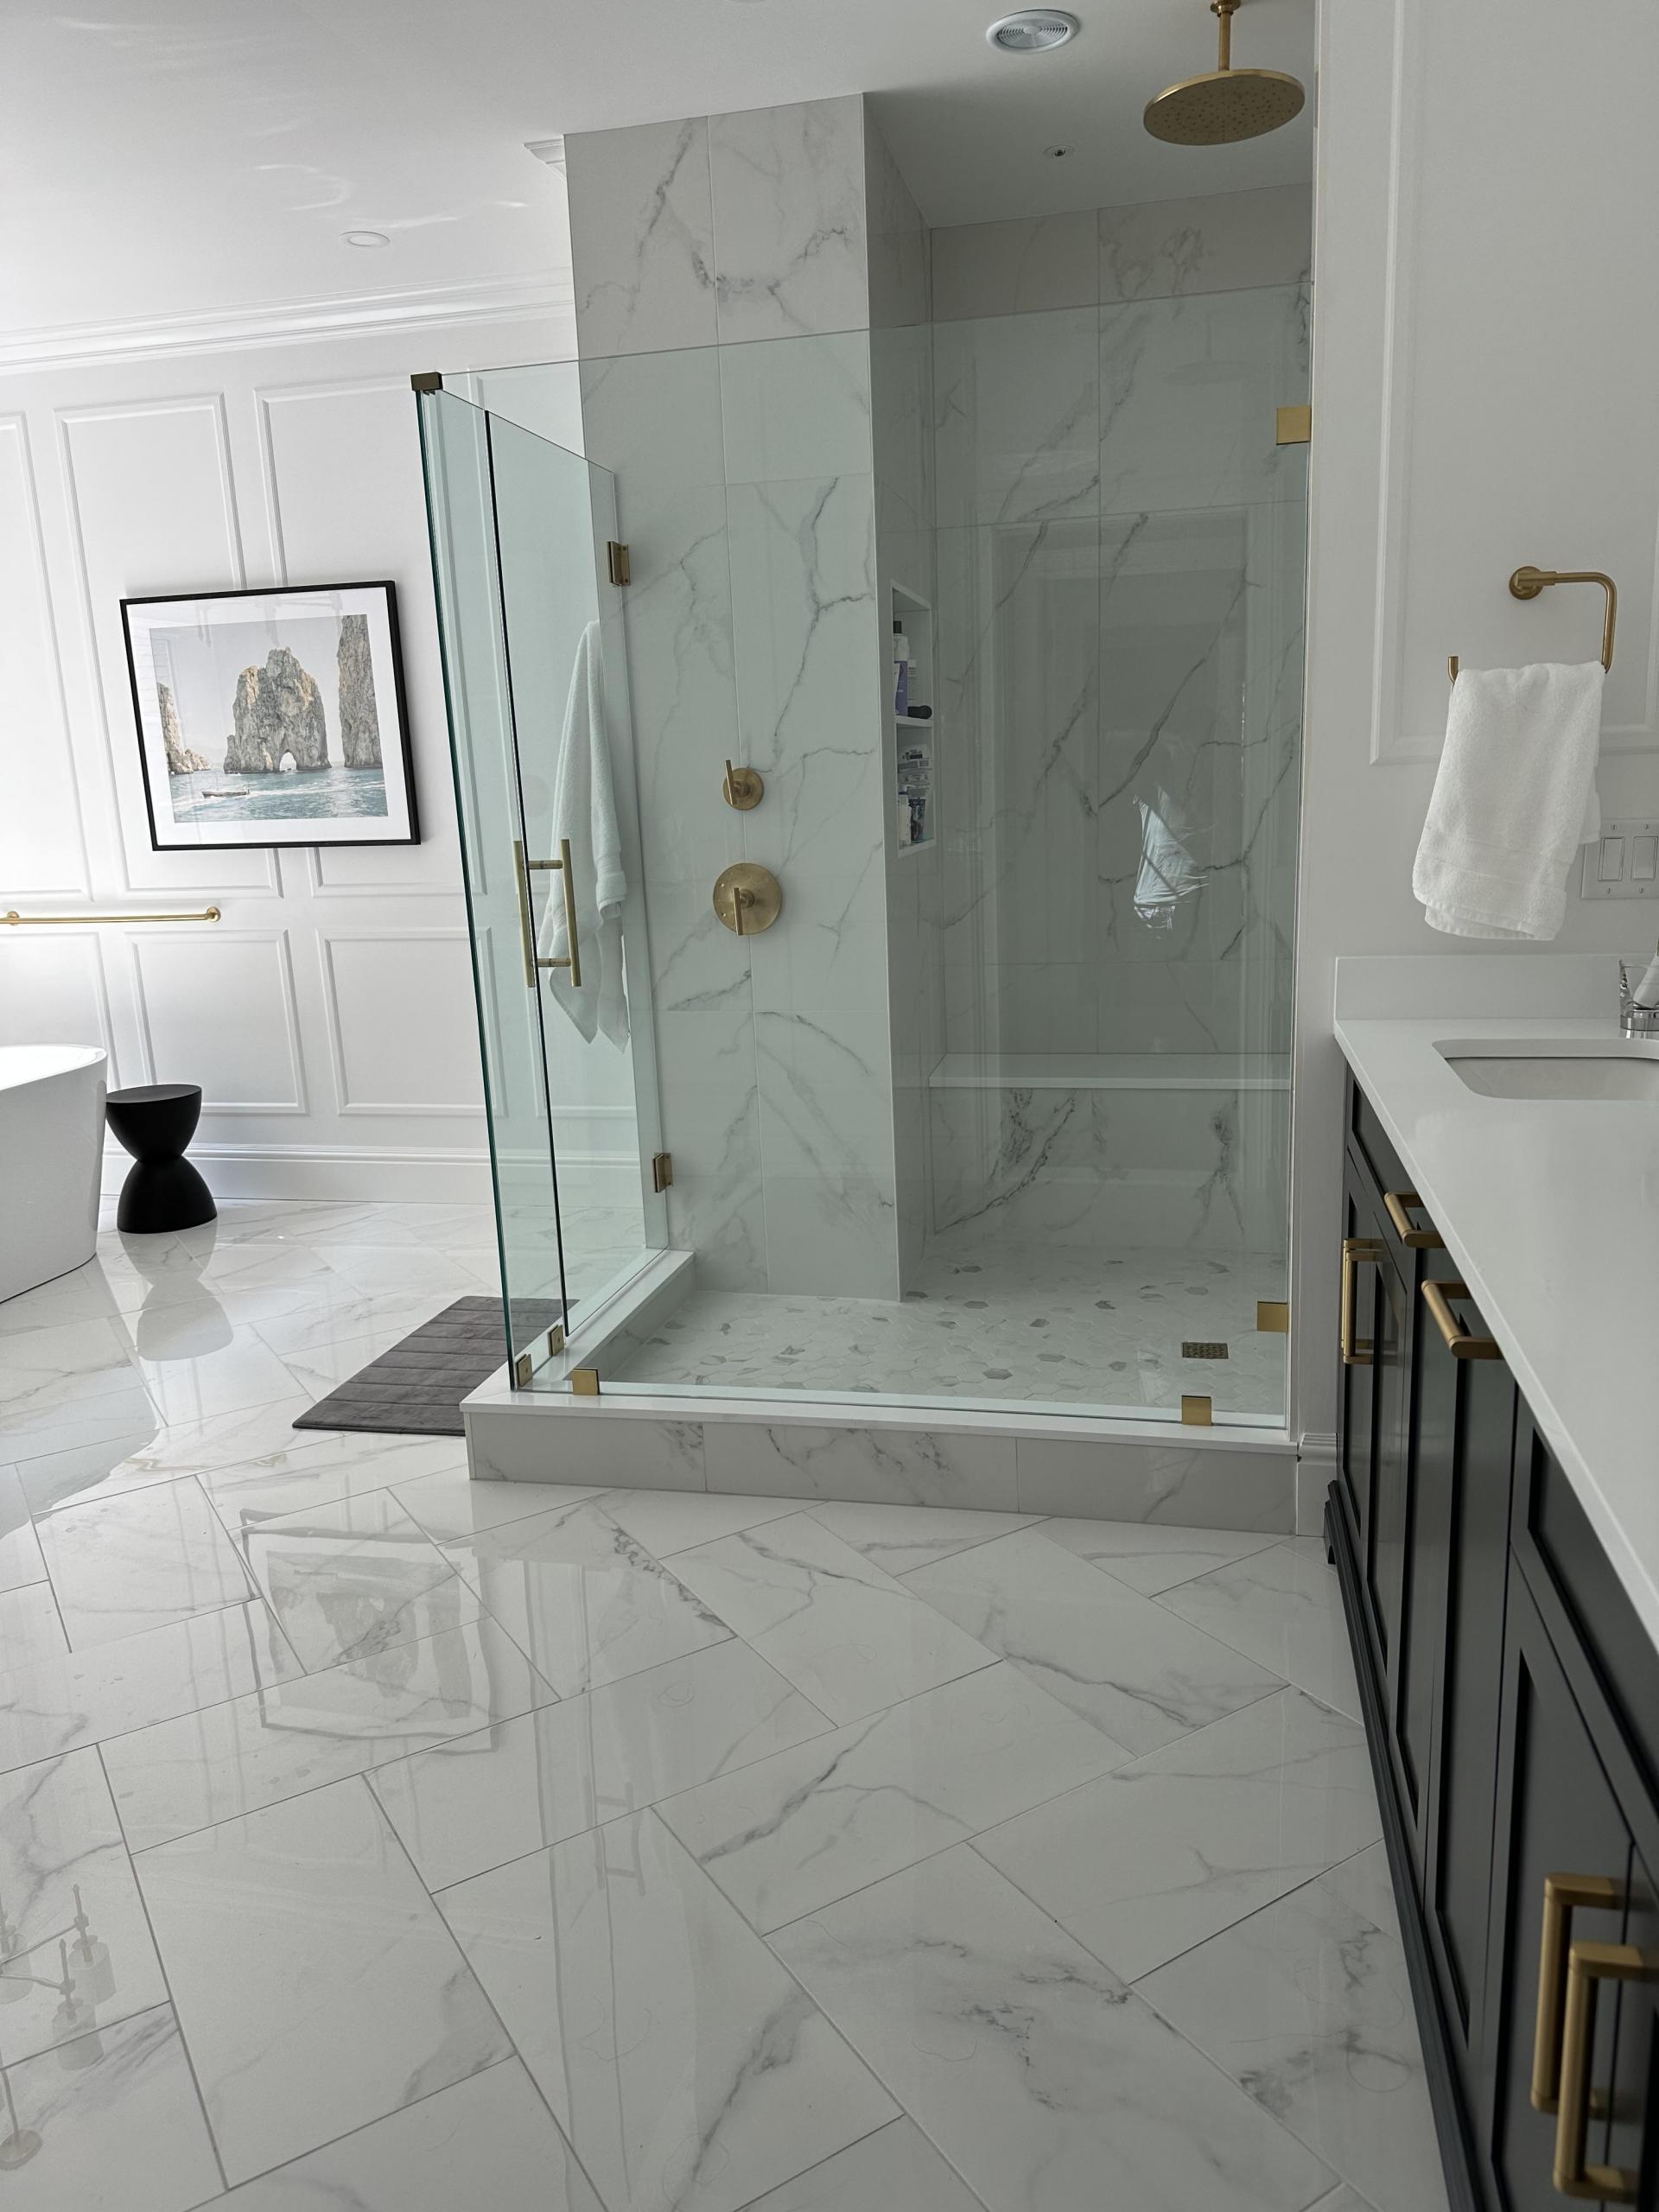 Products featured: 12x24 Lustre Calacatta Polished set on a herringbone, 24x48 Lustre Calacatta Polished, 24x48 Shower walls, and 2x3 Hex Carrara Hex Matte niche. Joe Limiero in our West Hartford showroom.